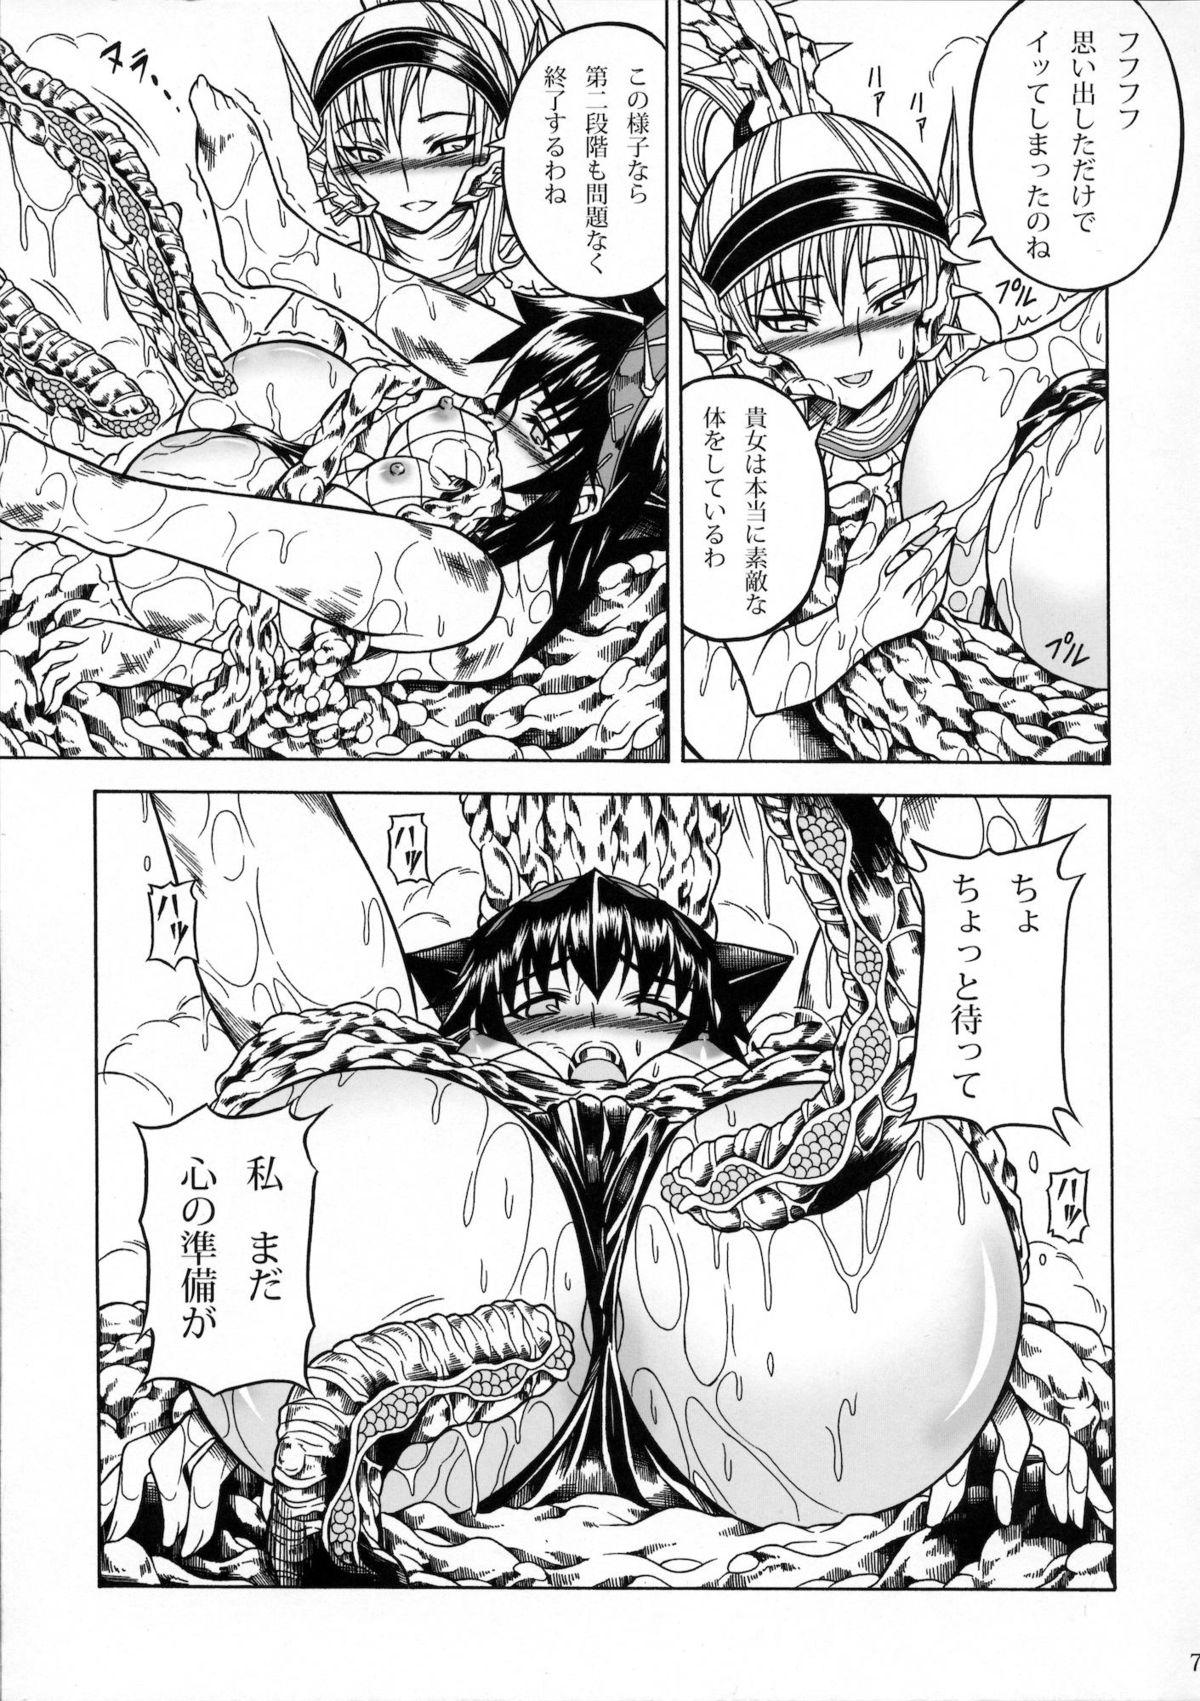 Fisting Solo Hunter no Seitai 2 The third part - Monster hunter Gay Boyporn - Page 6